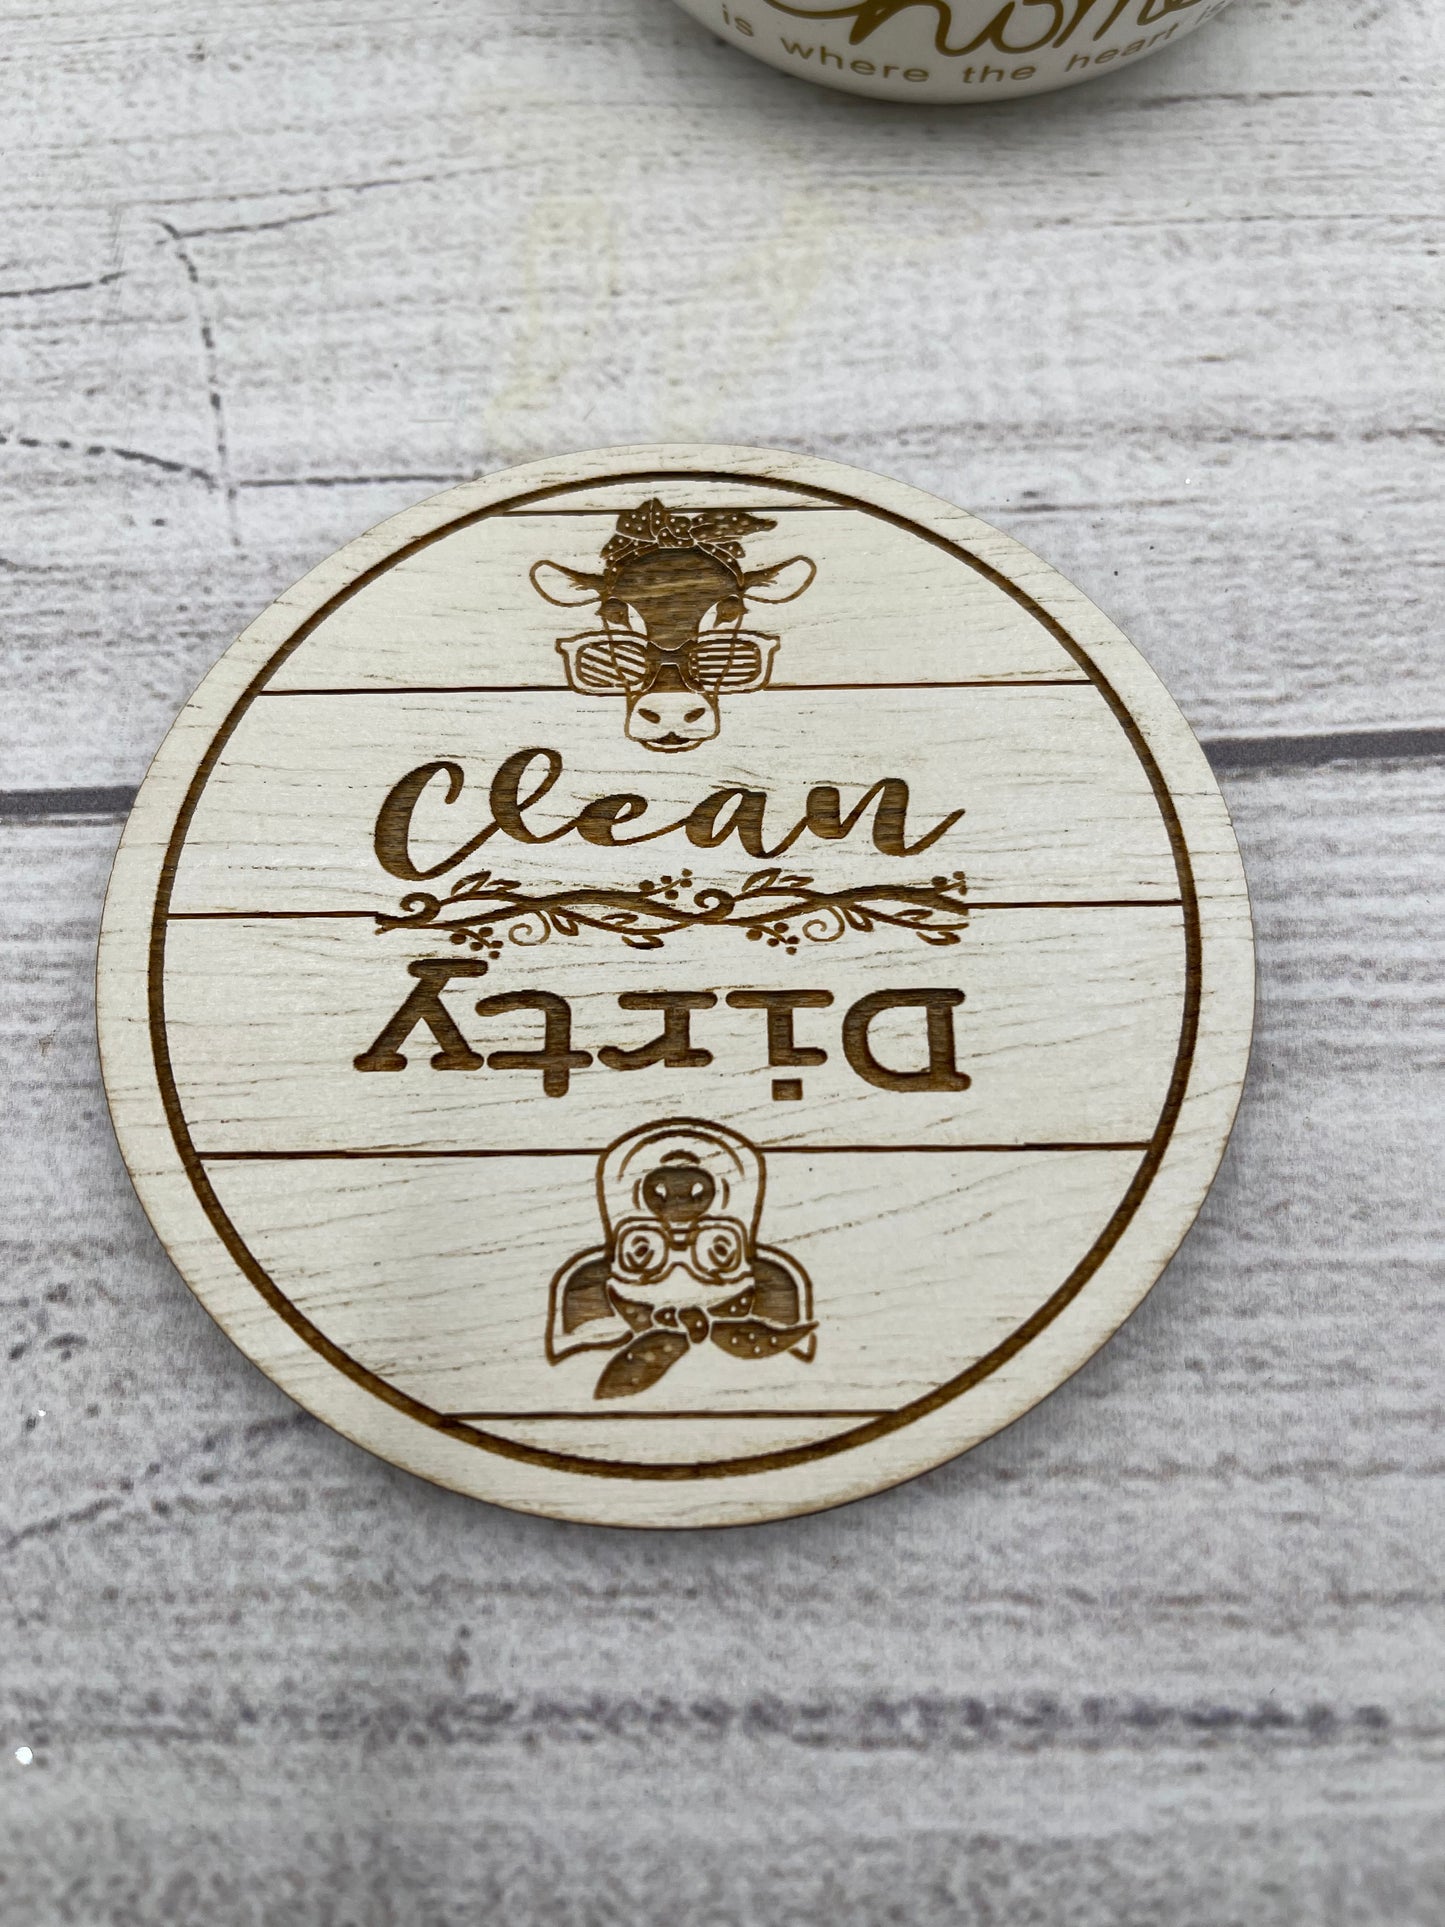 CLEAN DIRTY DISHWASHER MAGNET Cow says Clean Pig Says Dirty Farmhouse Shiplap